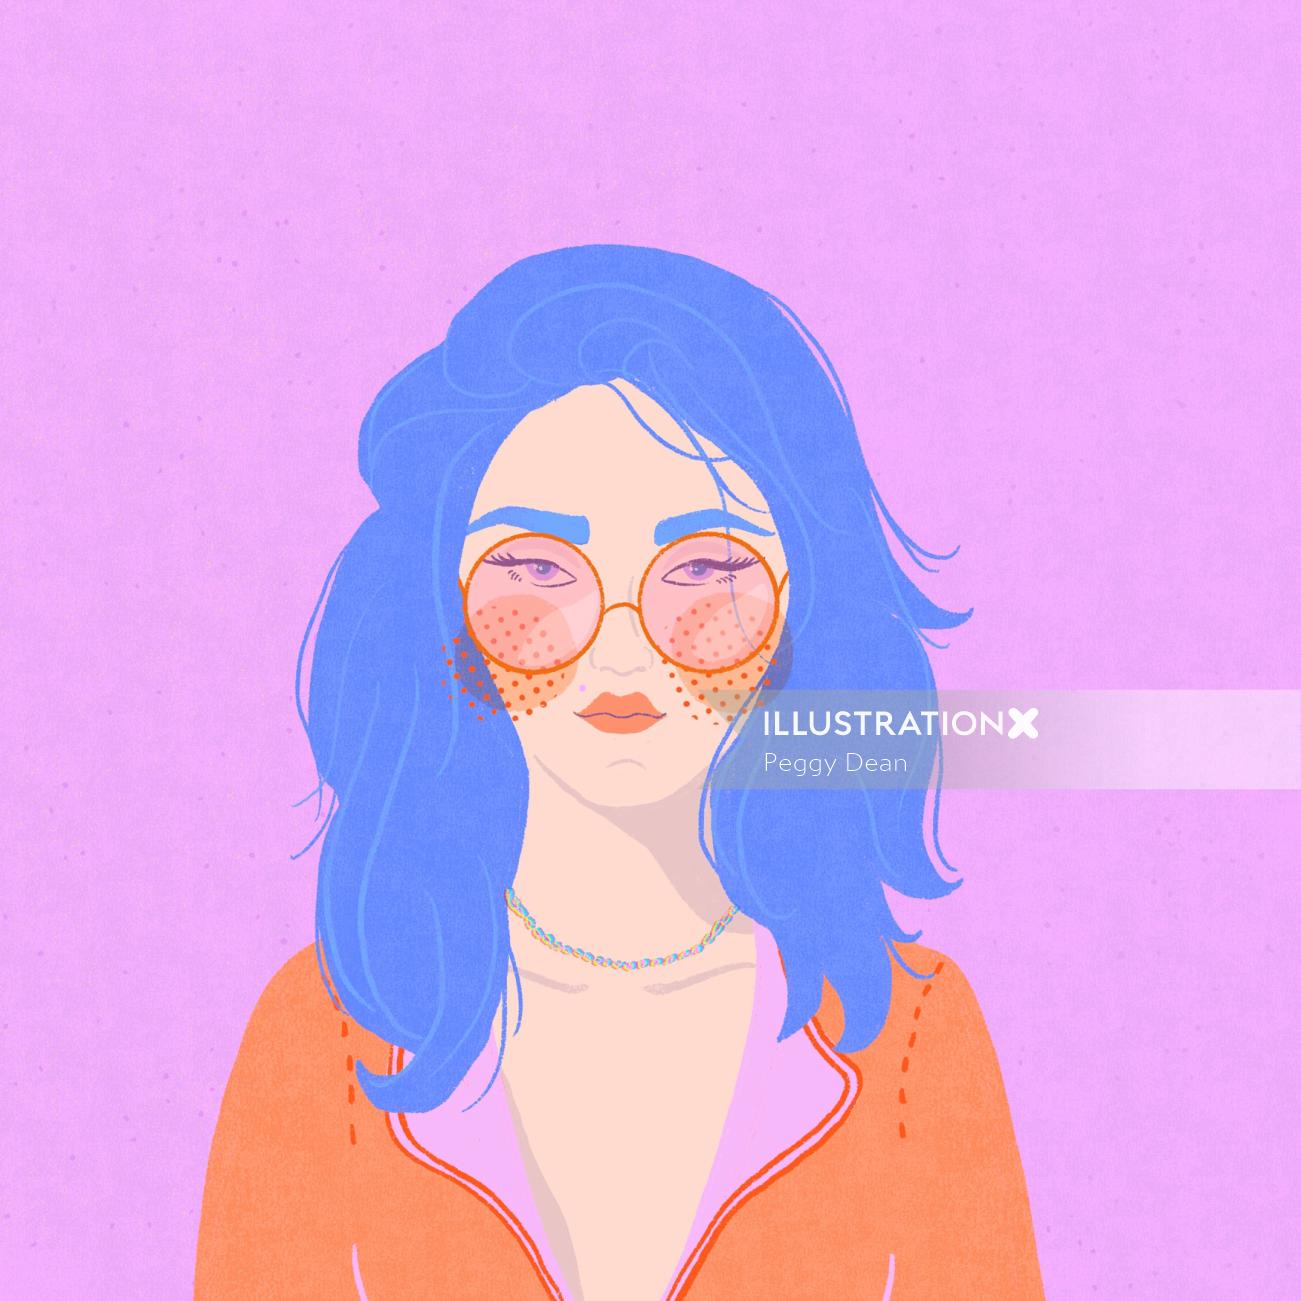 Graphic art of women with pink glasses